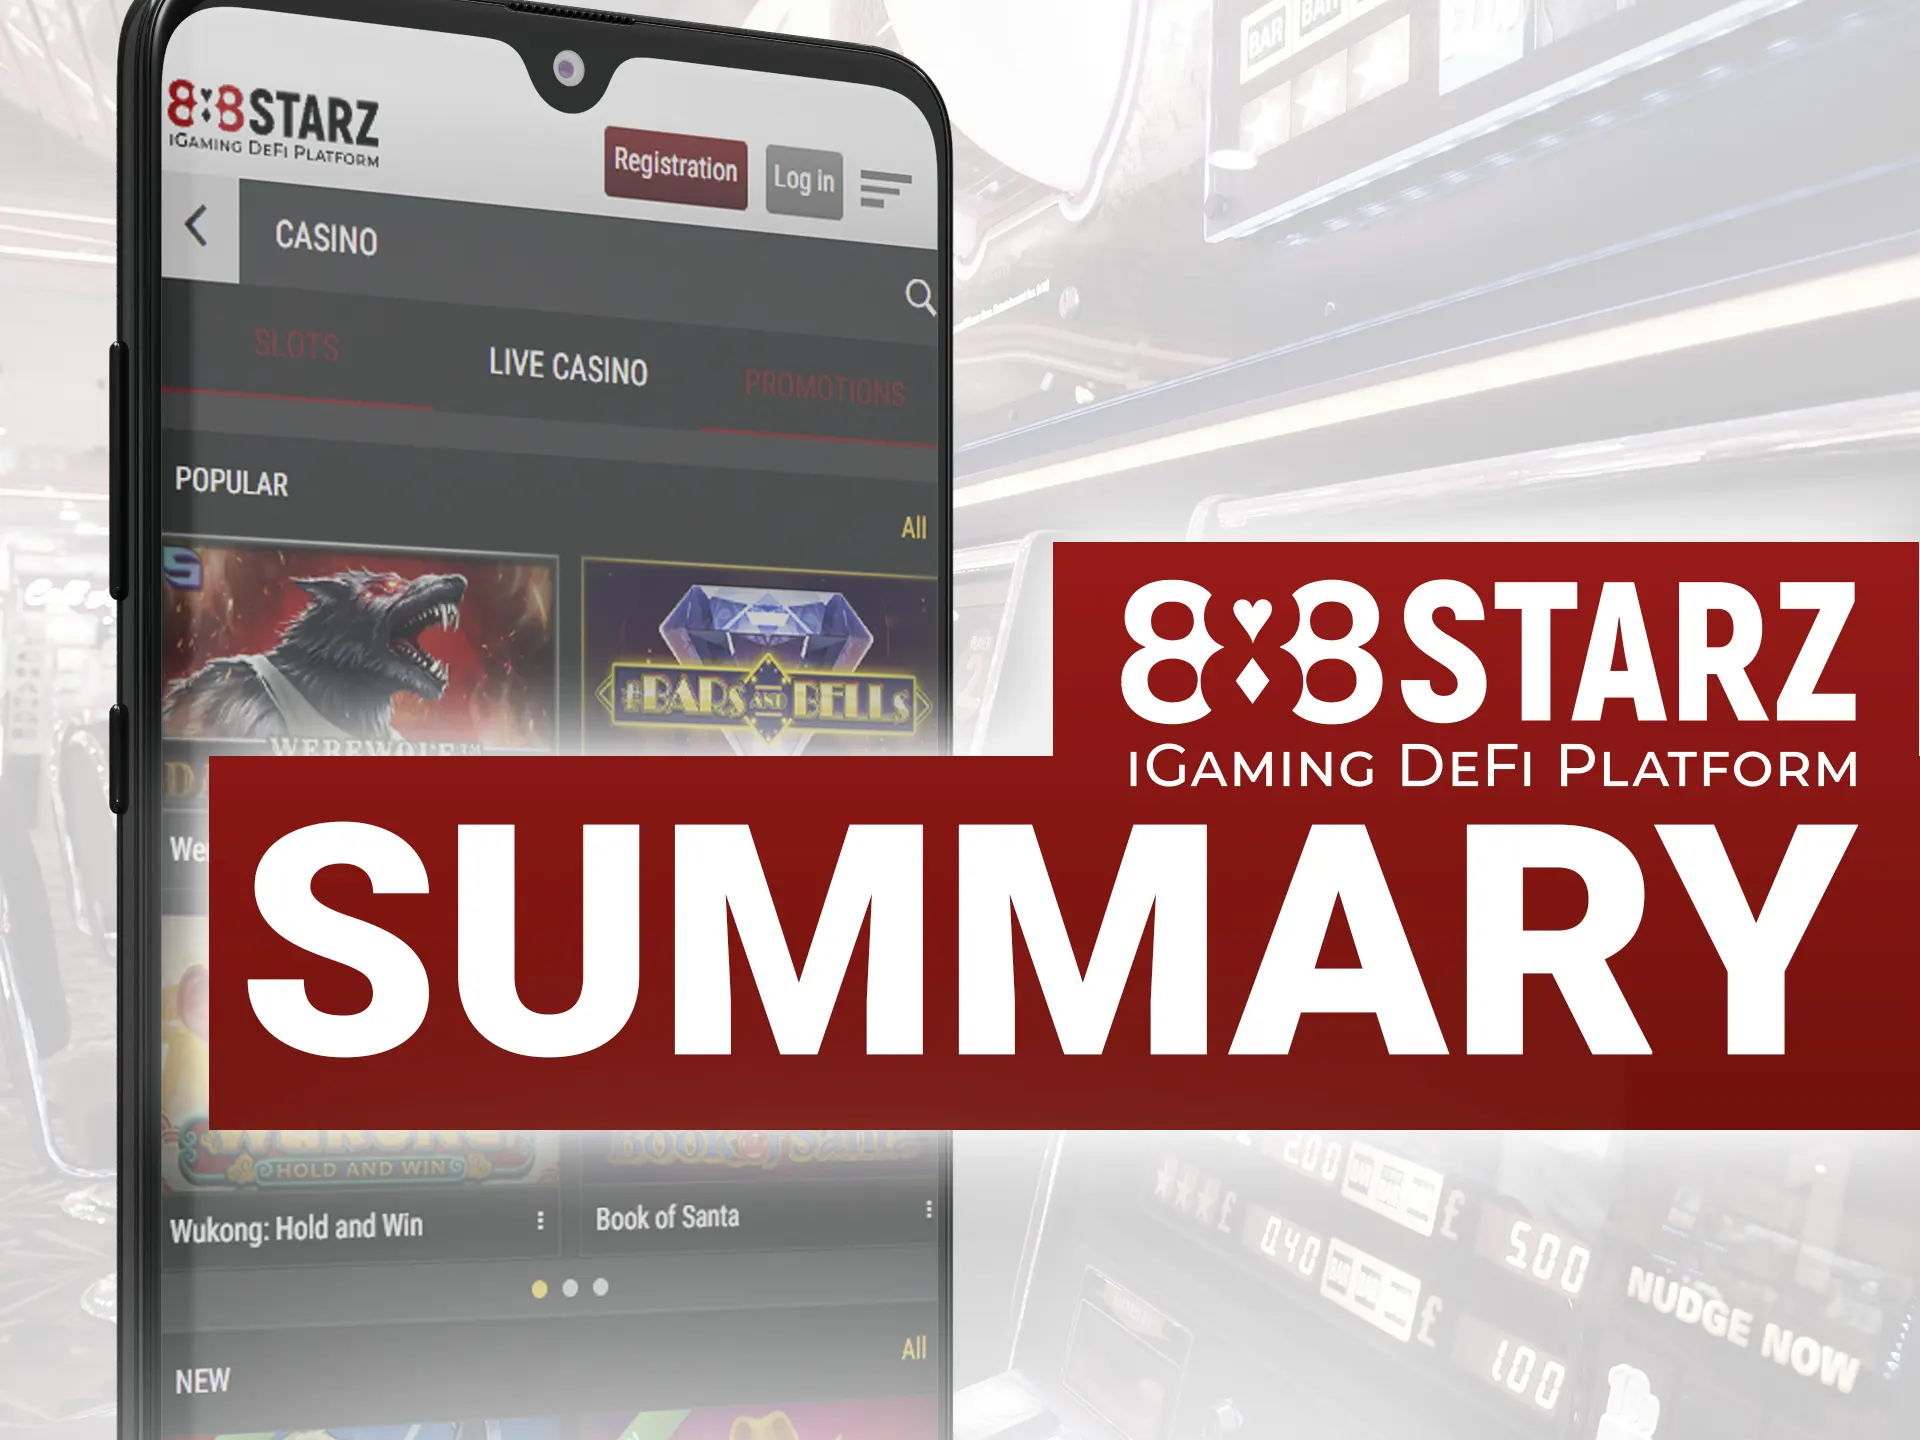 The 888Starz casino app provides a dynamic gaming experience with unique features